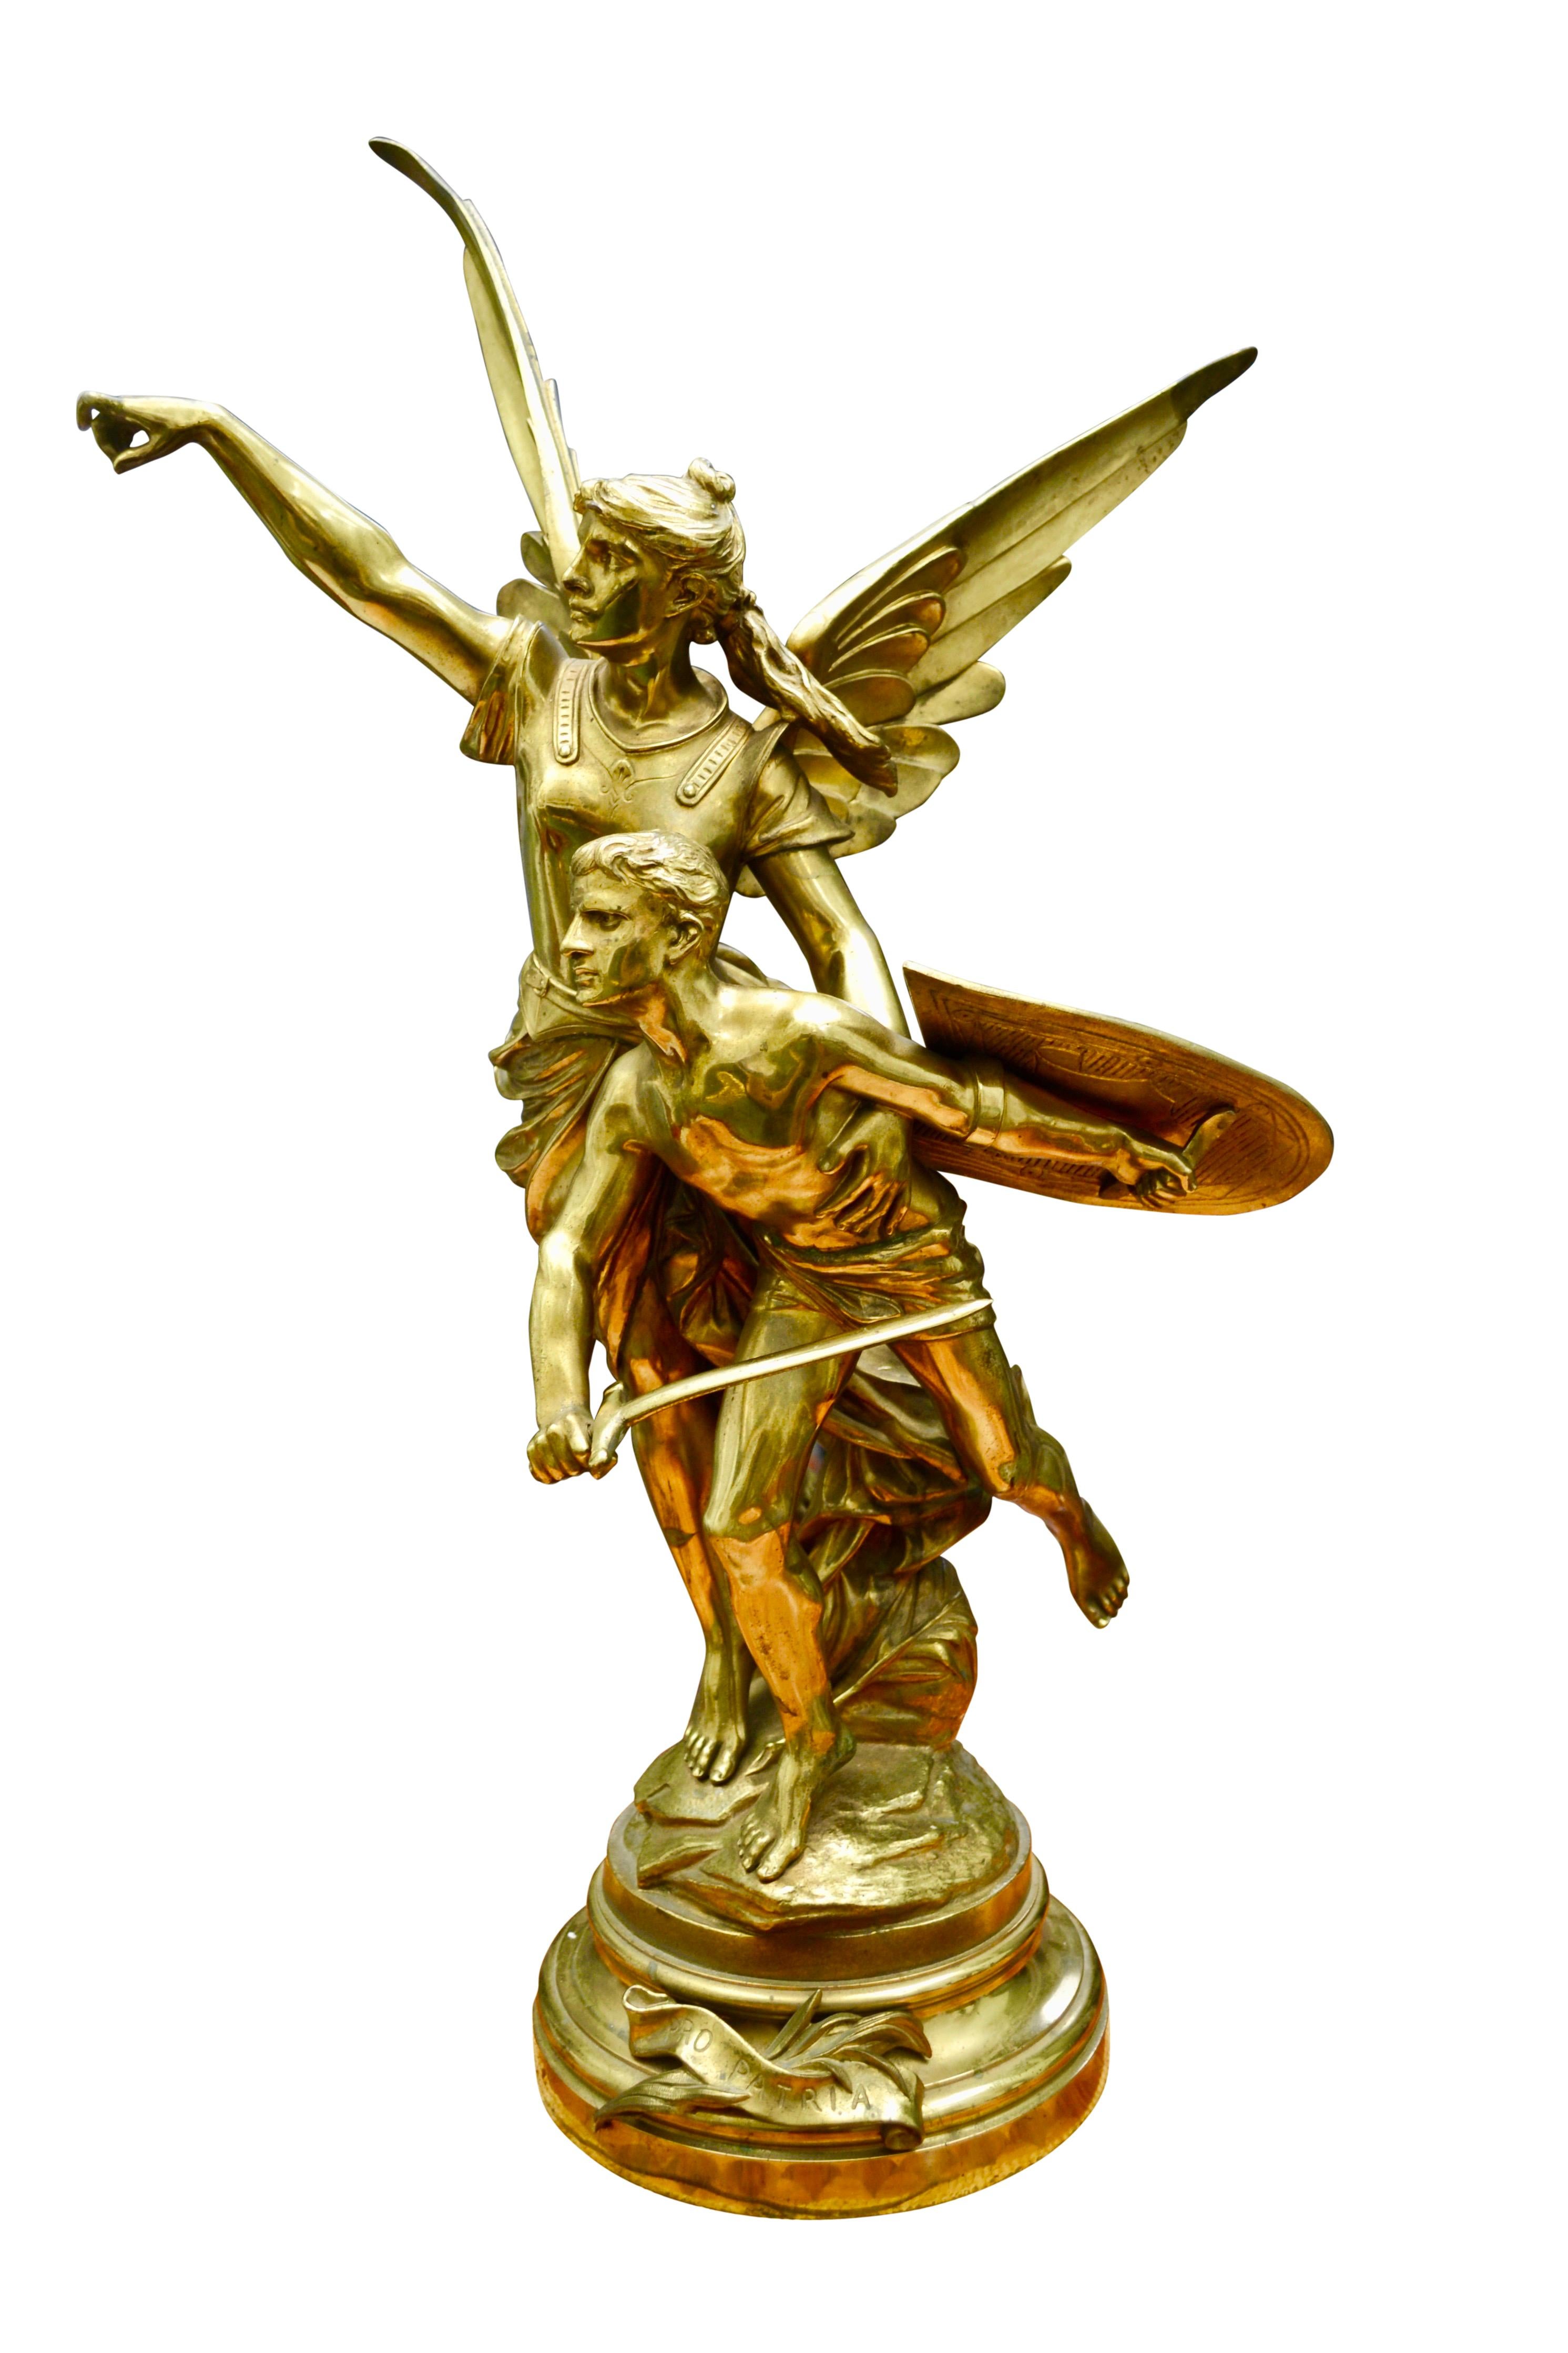 Romantic French 19 Century Gilt Bronze Figural Group Titled Pro Patria by Edouard Drouot For Sale